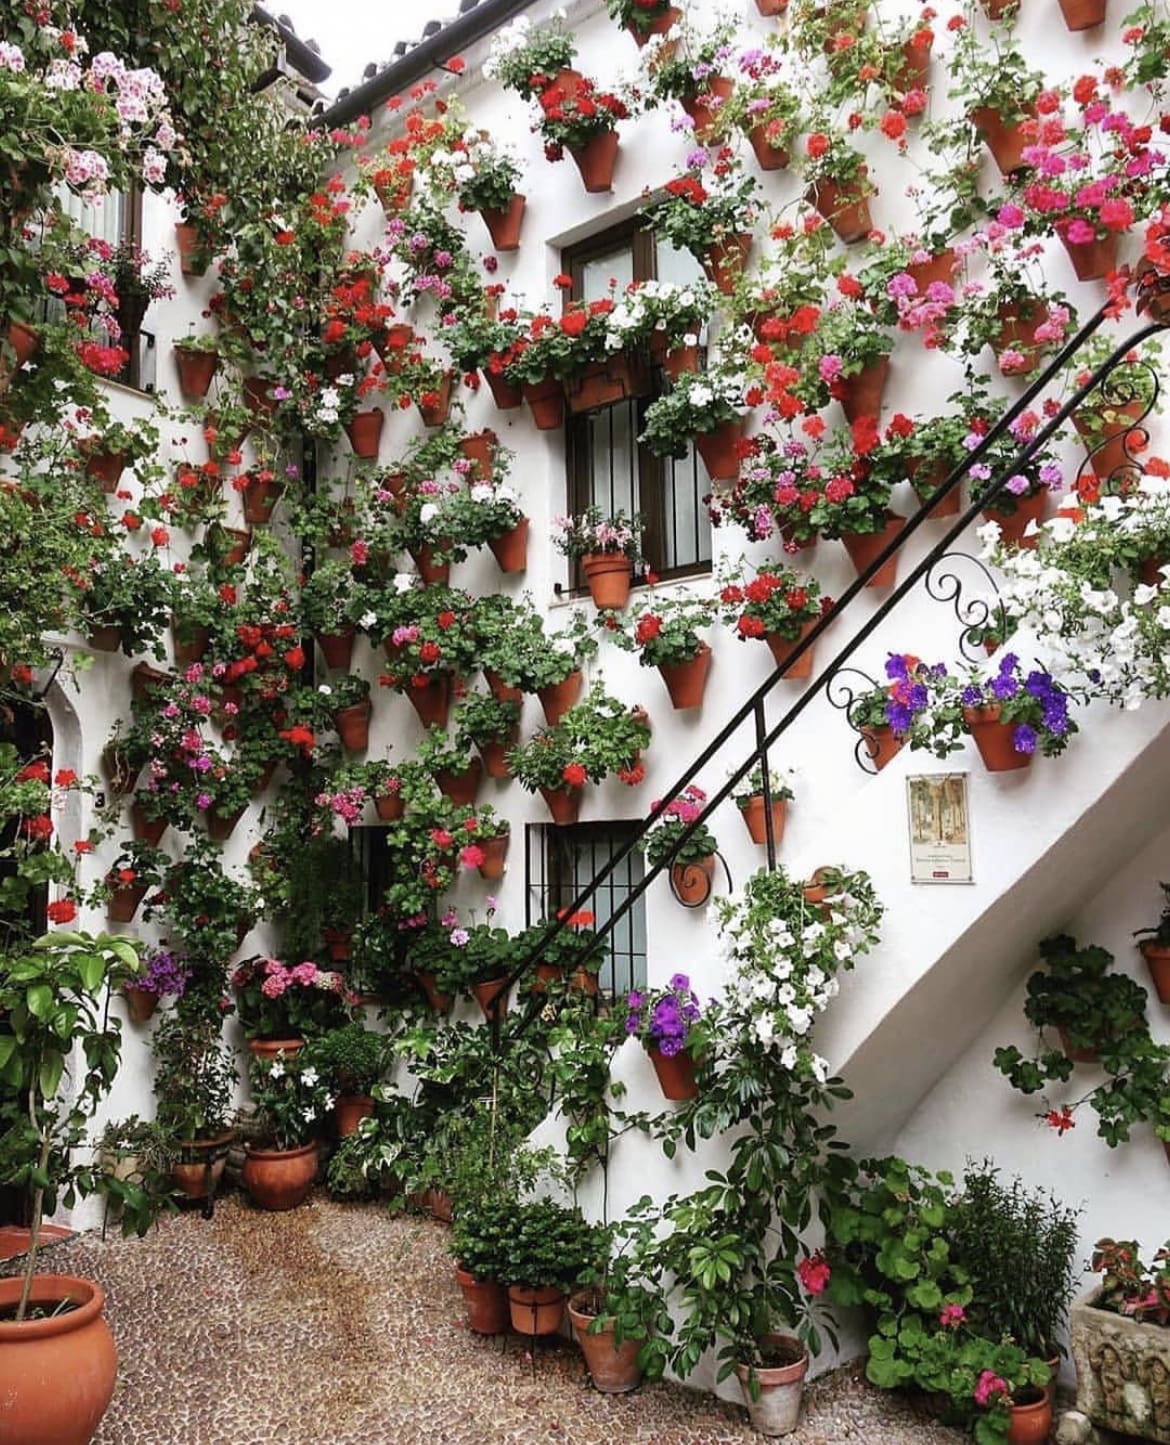 Landscaped front yard in Cordoba